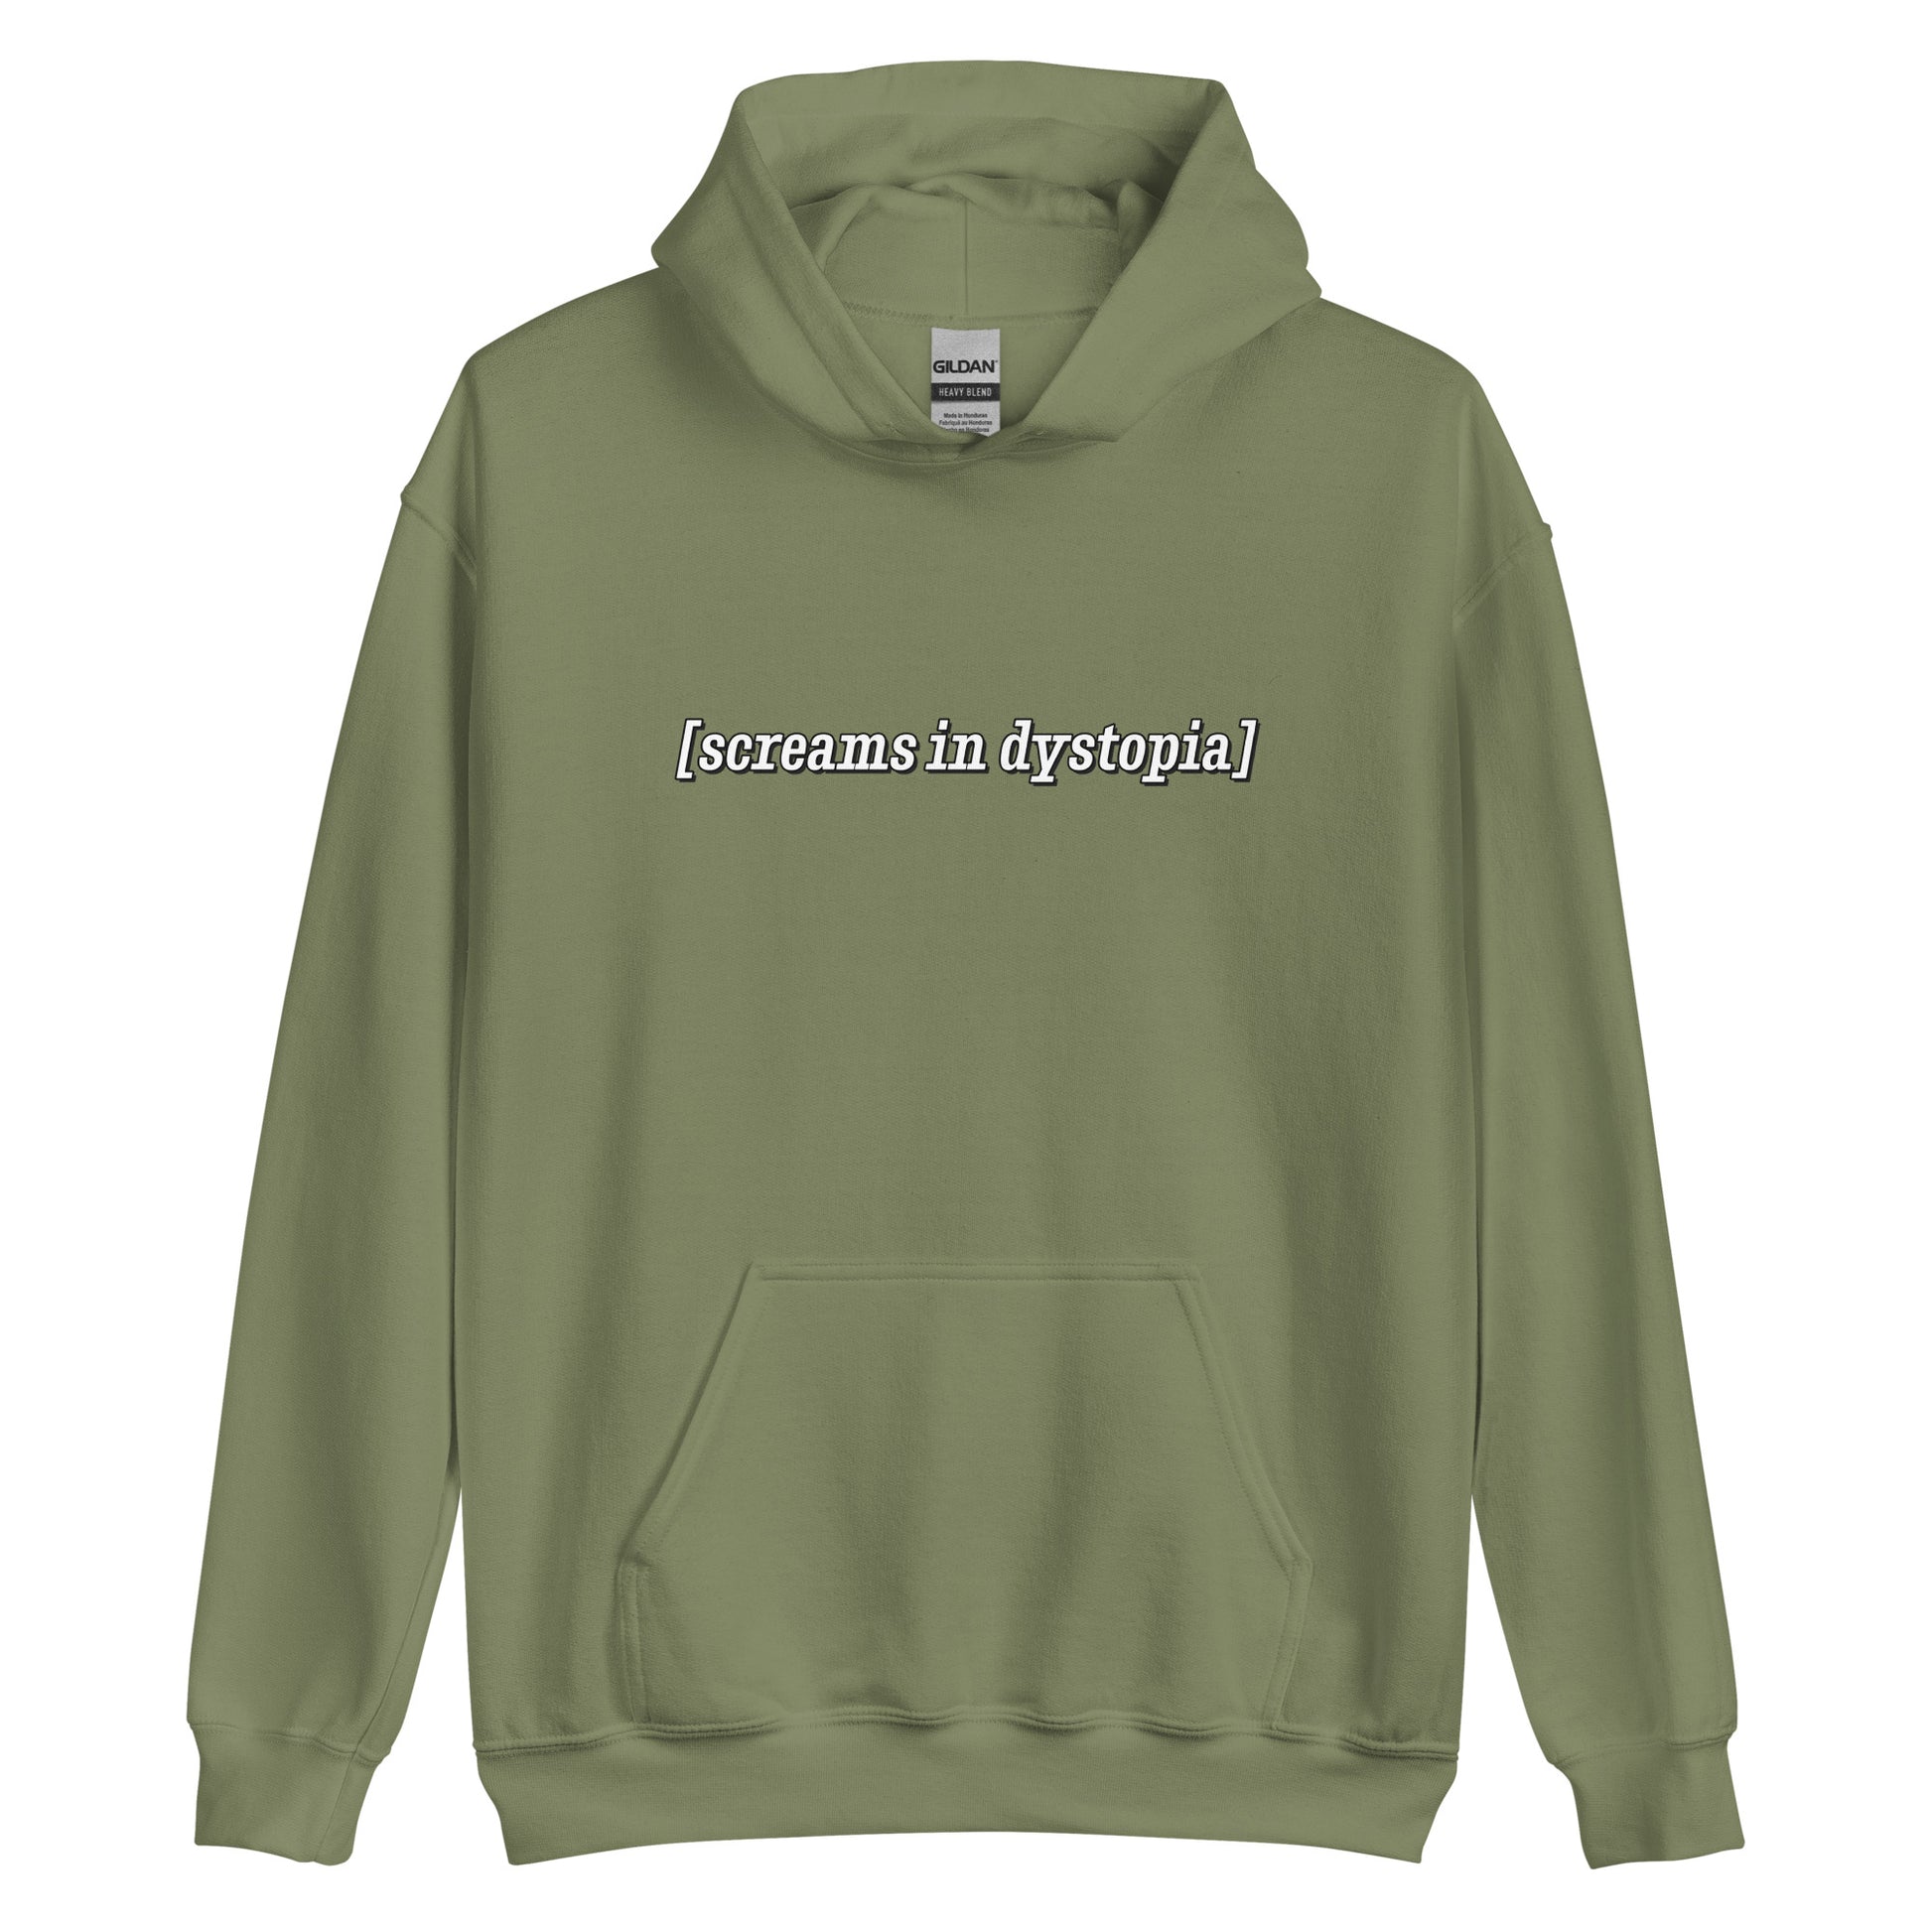 An olive green hooded sweatshirt with white text in the style of subtitles. The text reads "[screams in dystopia]".